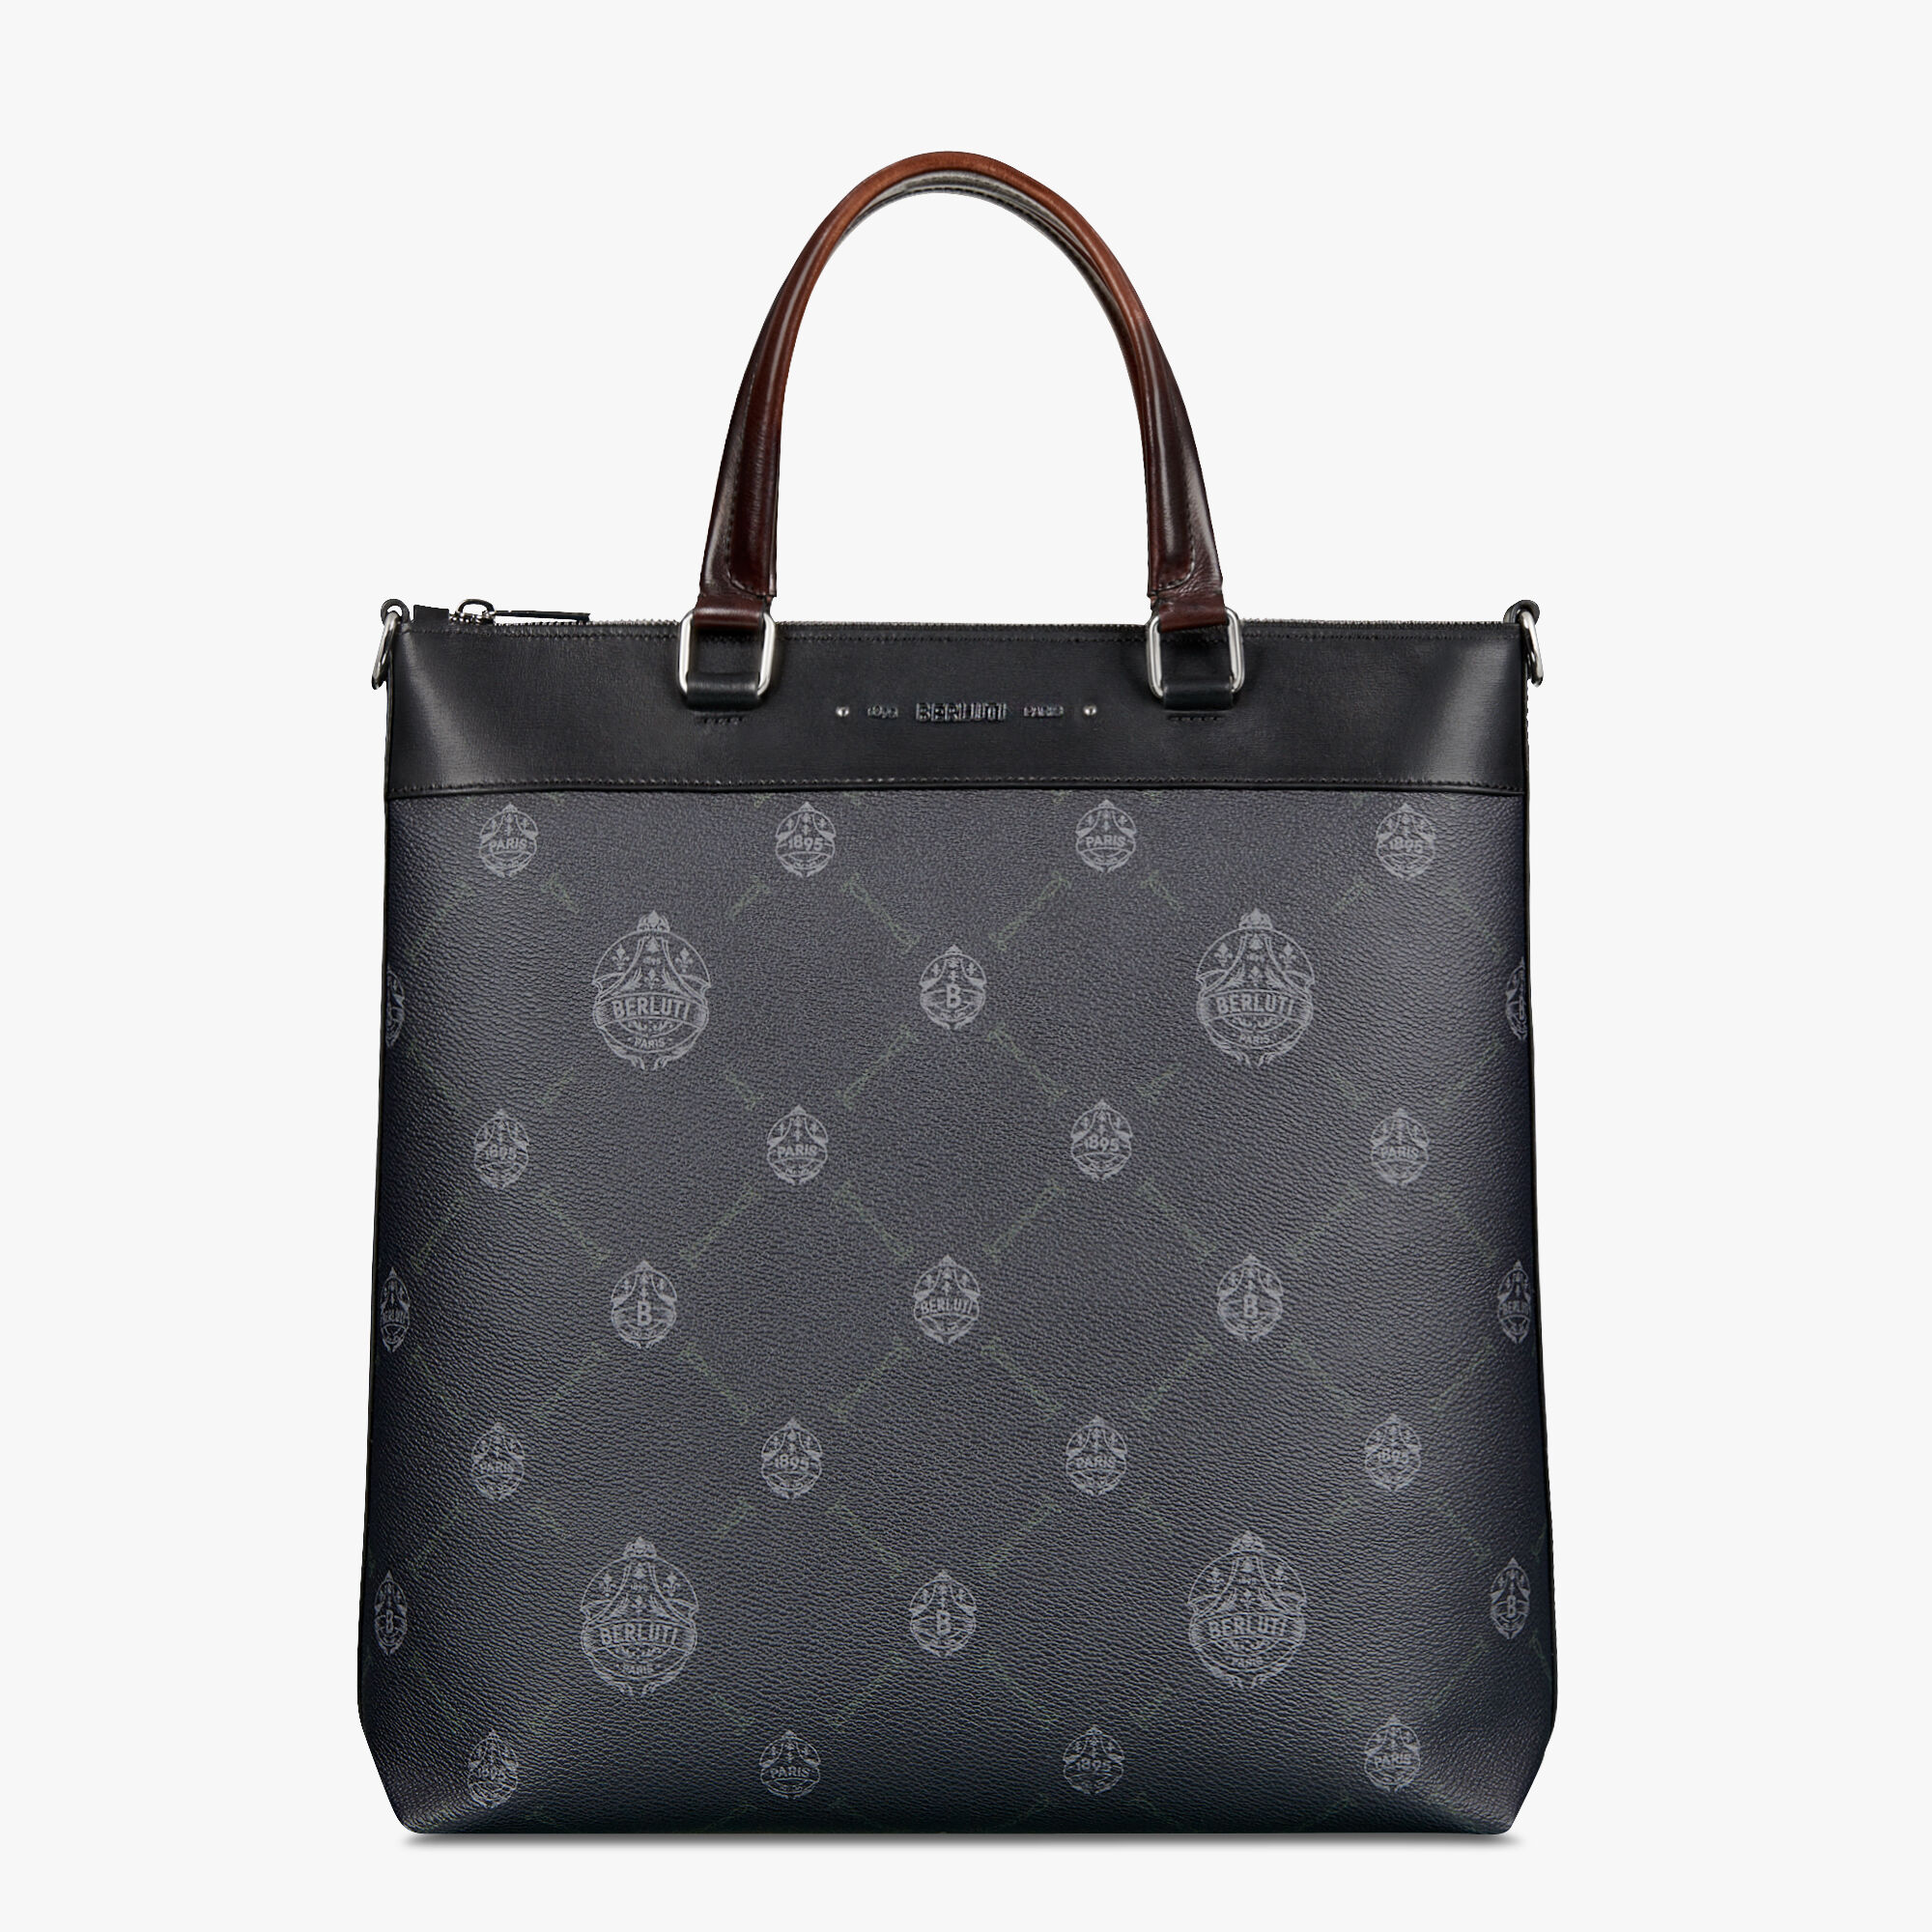 Tote bag collections by Berluti - US